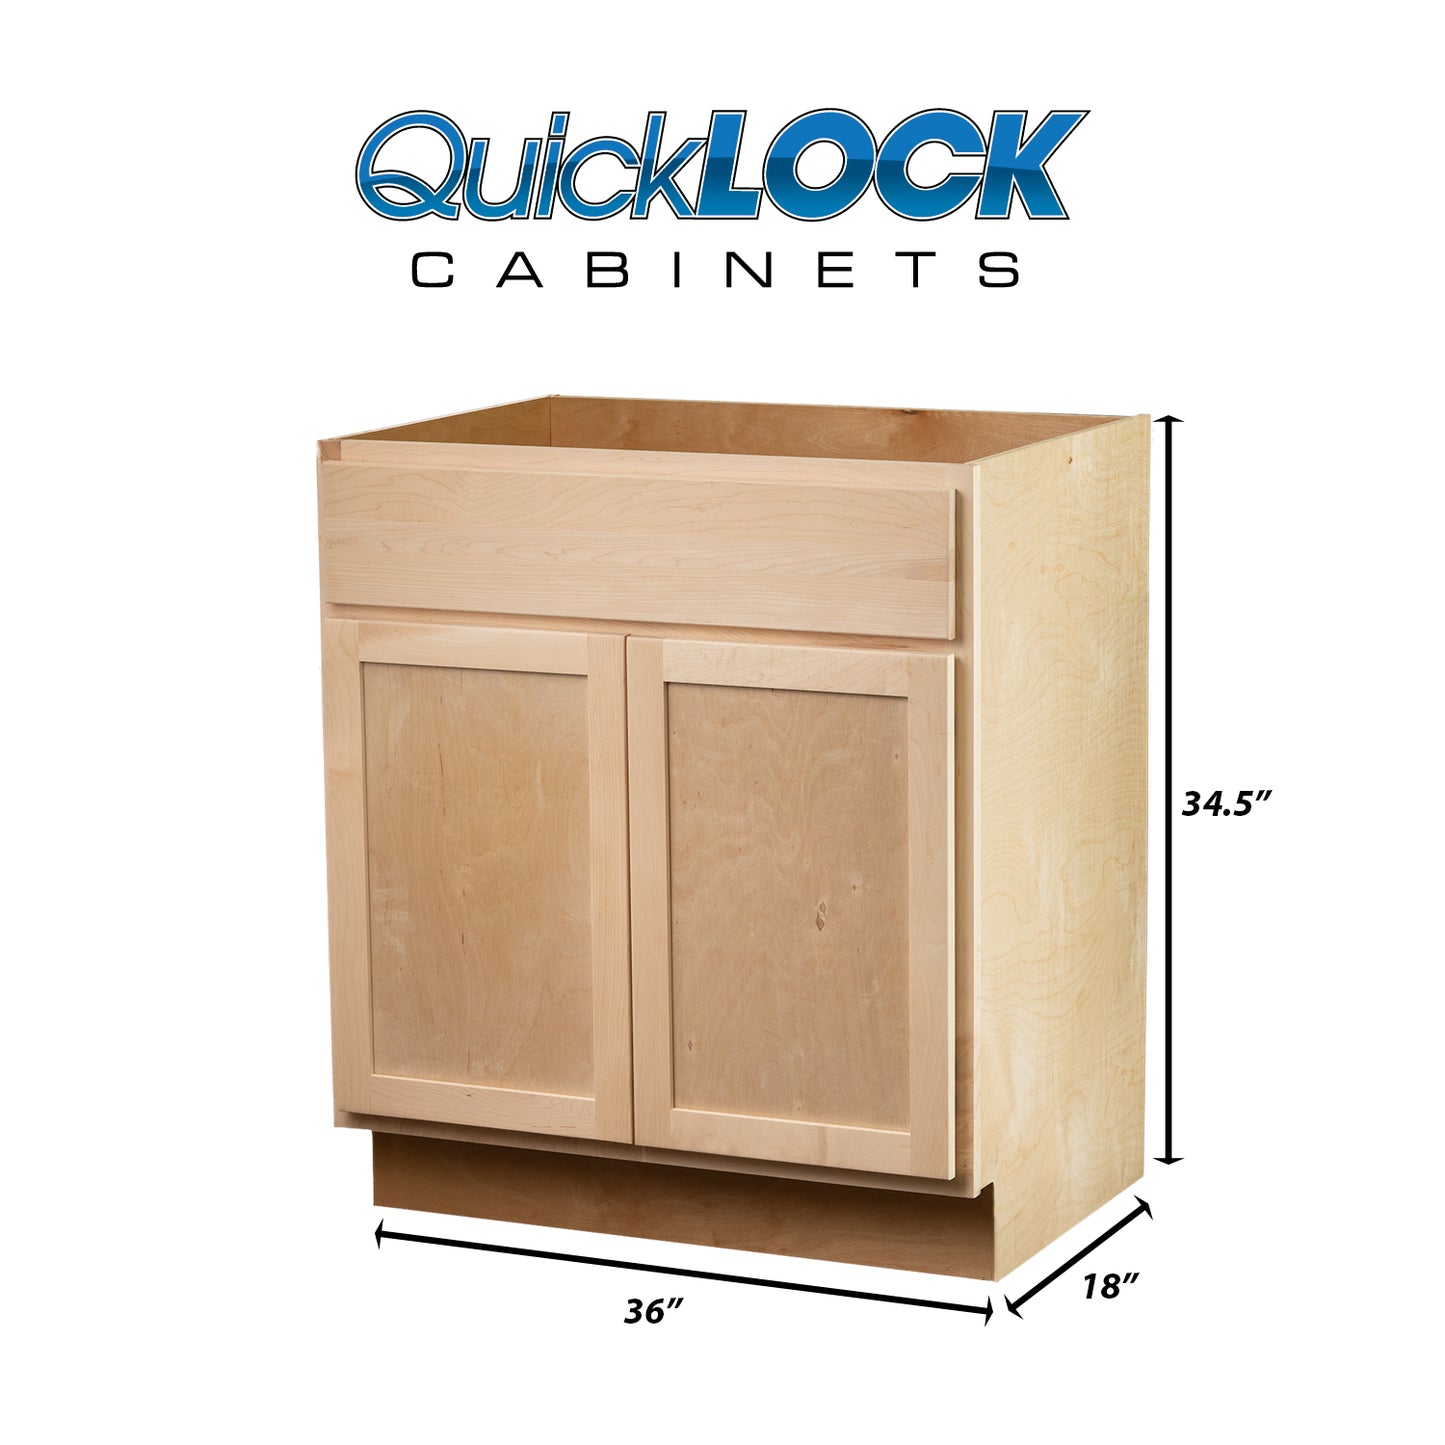 Quicklock RTA (Ready-to-Assemble) Raw Maple Vanity Base Cabinet | 36"Wx34.5"Hx18"D